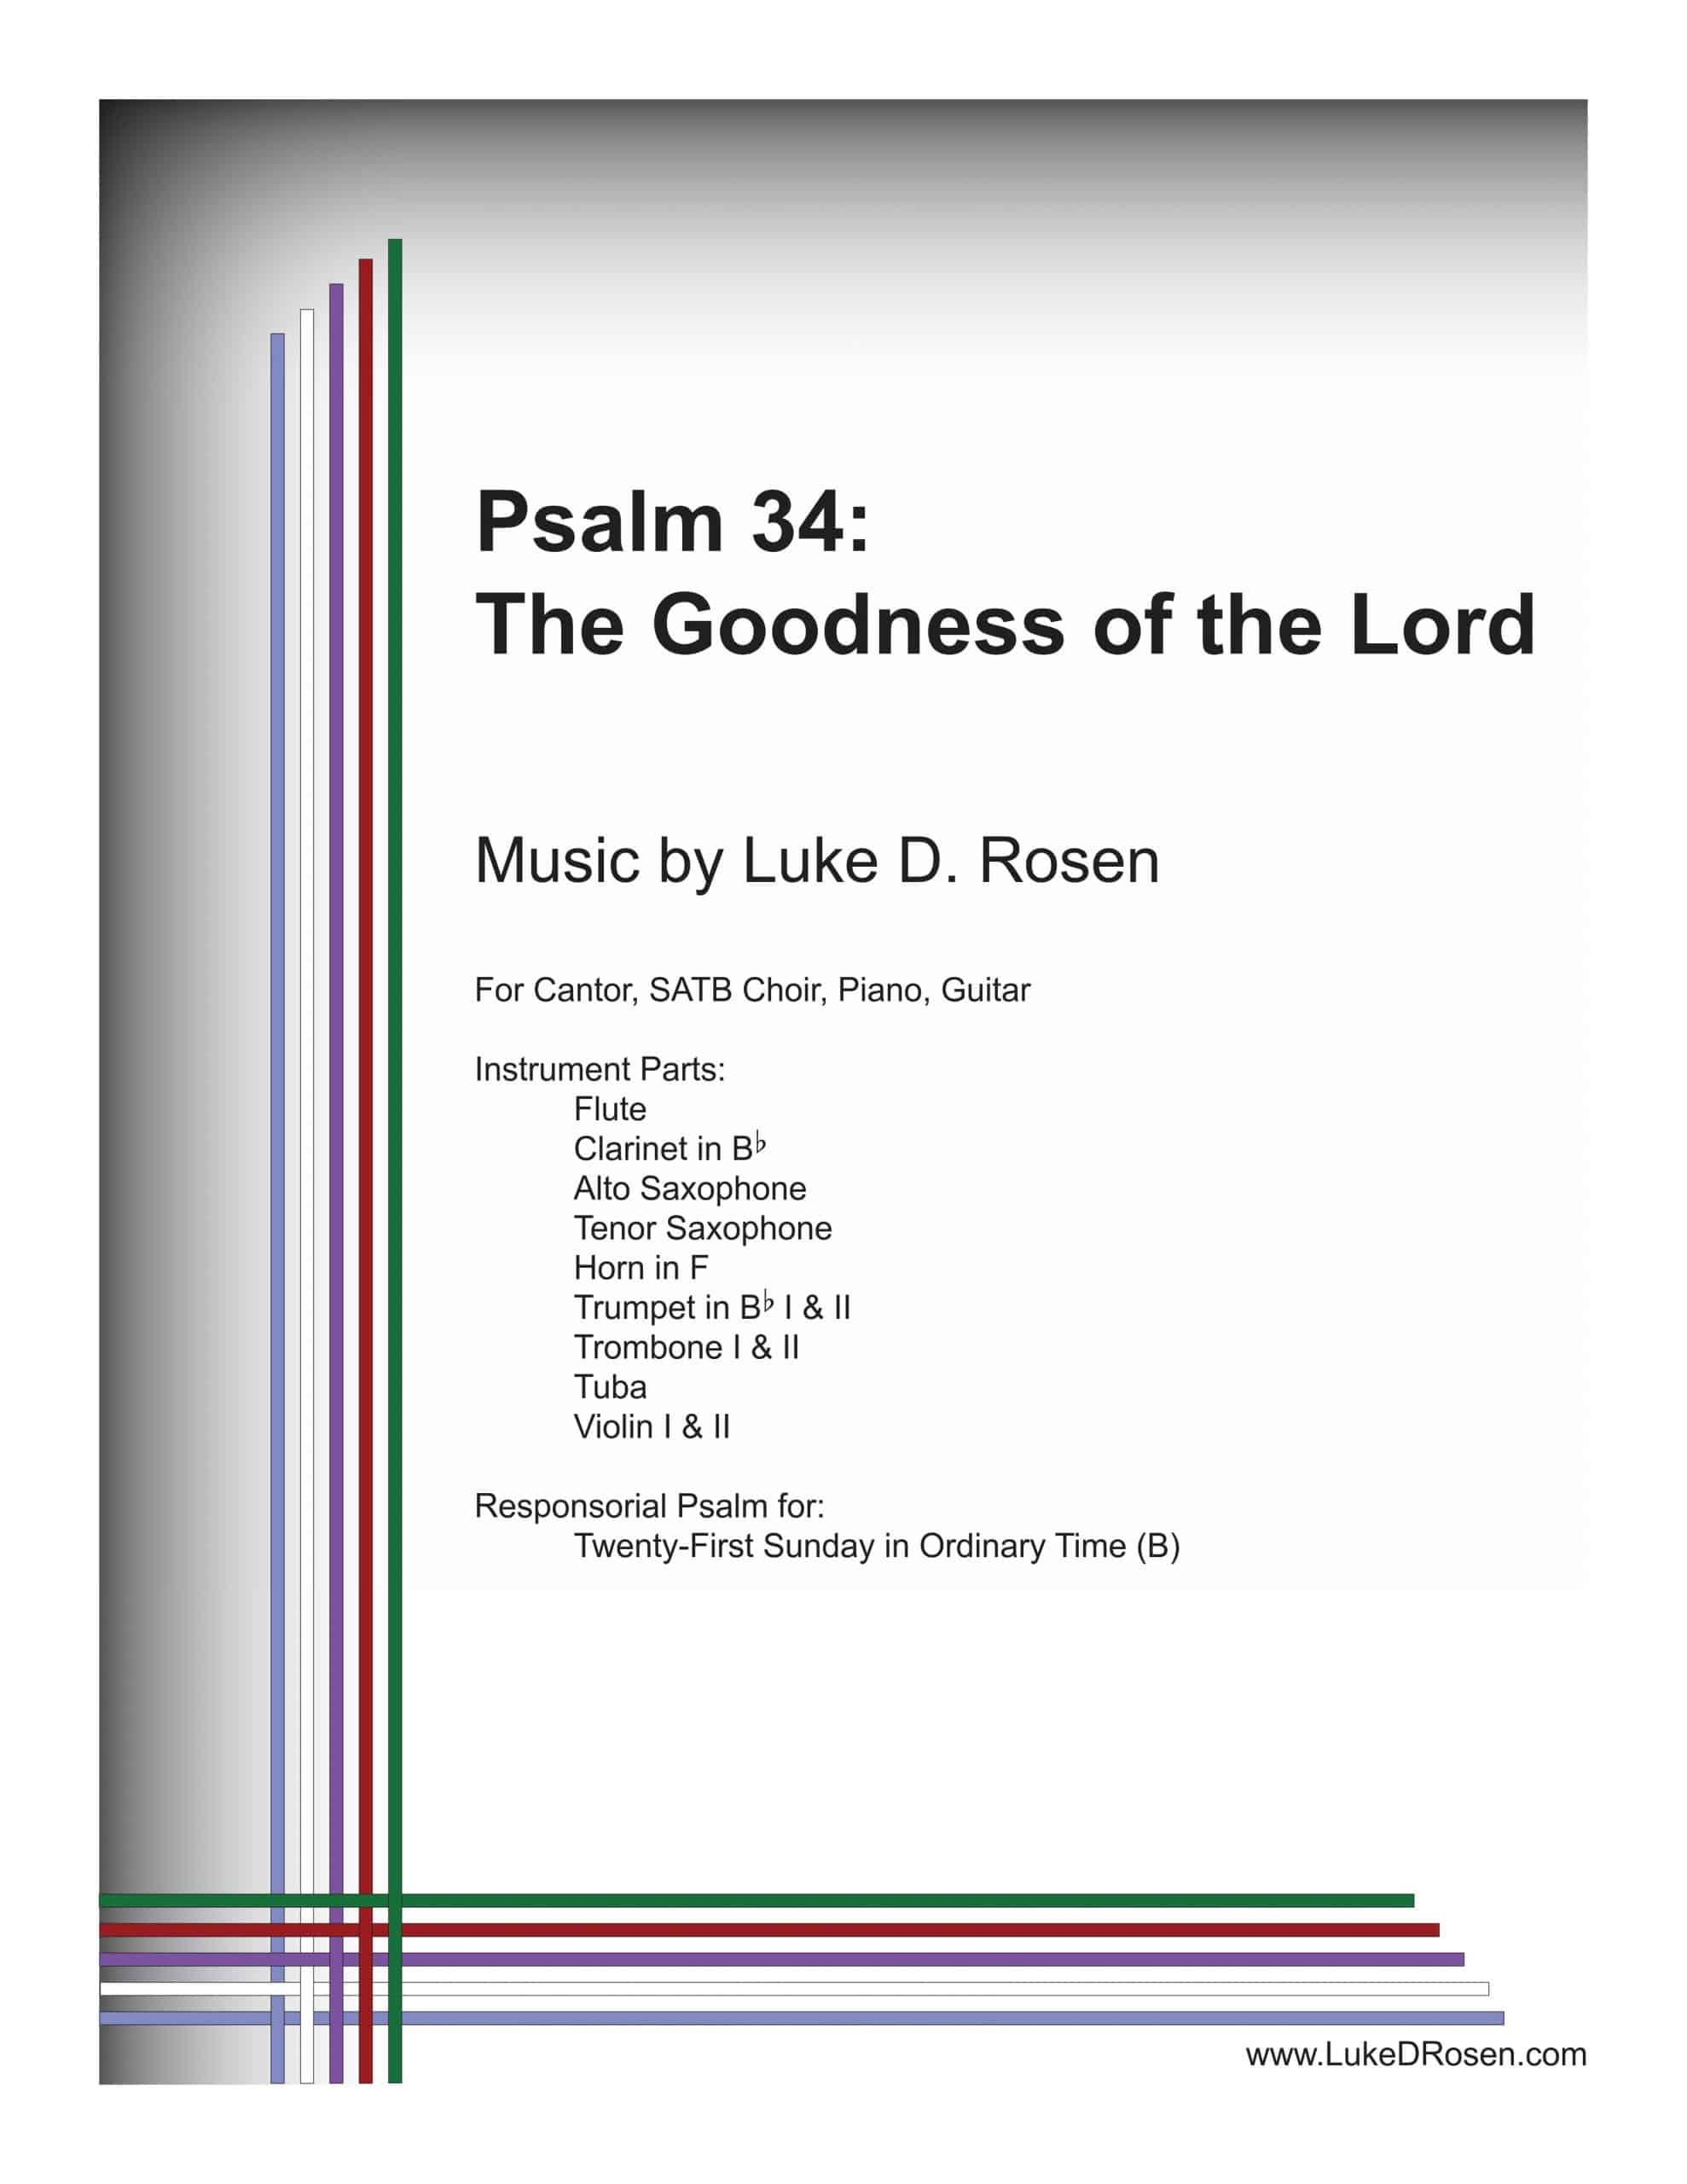 Psalm 34 – The Goodness of the Lord (Rosen)